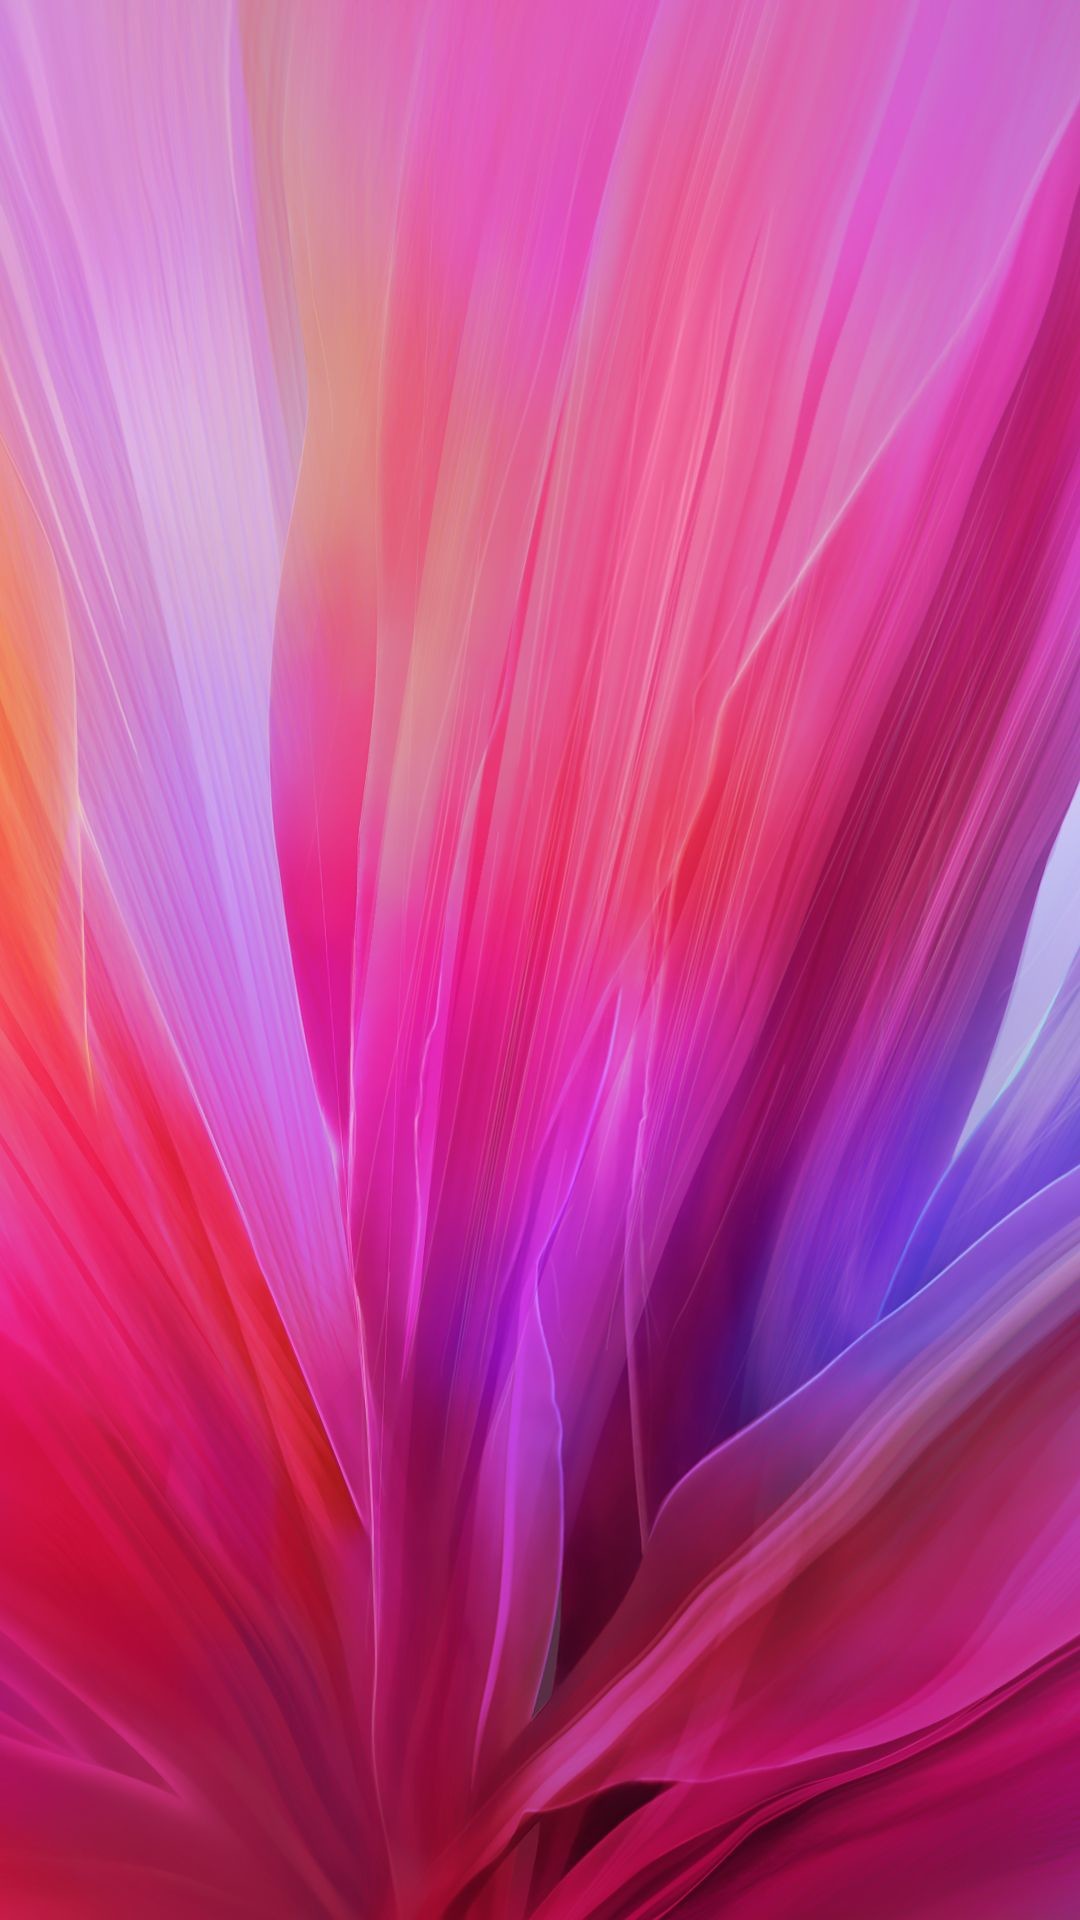 1080x1920 This is an awesome Sony Xperia Z5 Wallpaper with abstract colorful  background. An alternative picture that will make your smartphone looks  different and ...